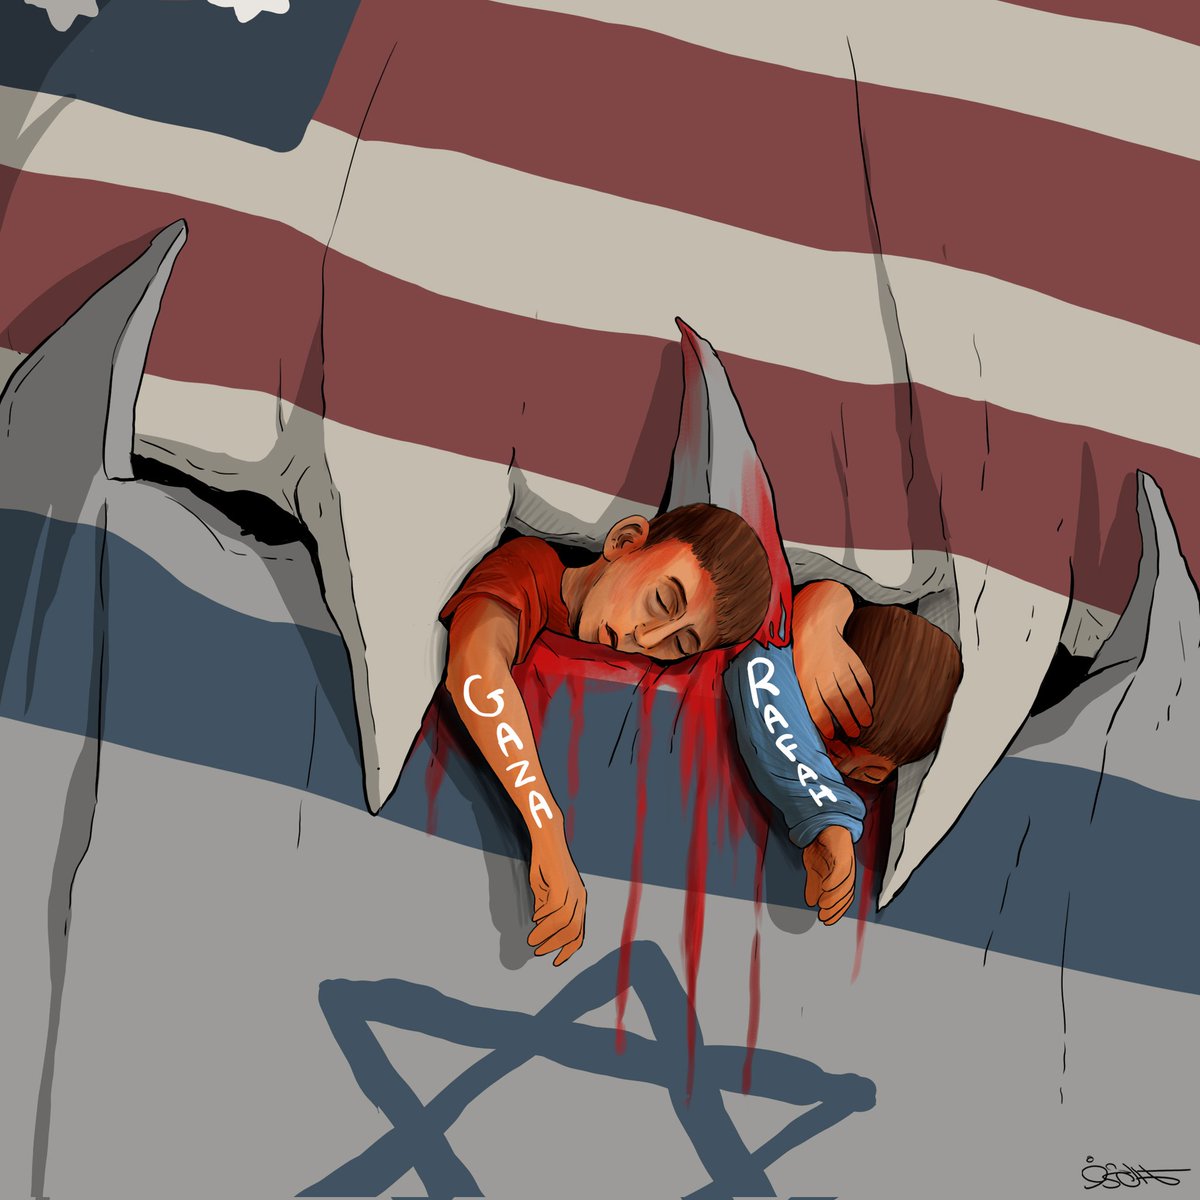 The United States of America is a partner in the killing of the Palestinian people. #Rafah #GazaGenocide